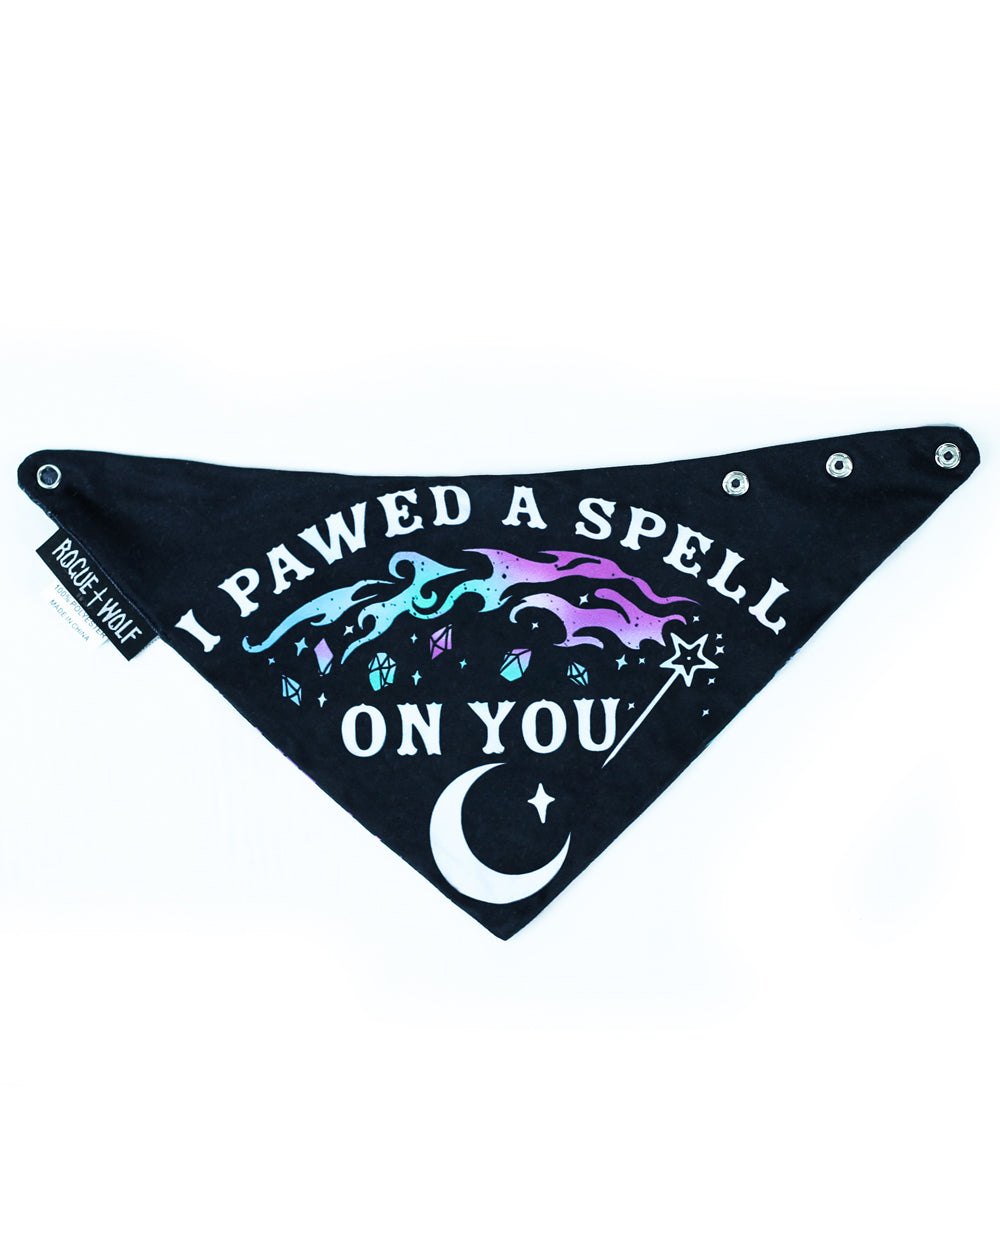 I Pawed a Spell on You Pet Bandana - Dog or Cat